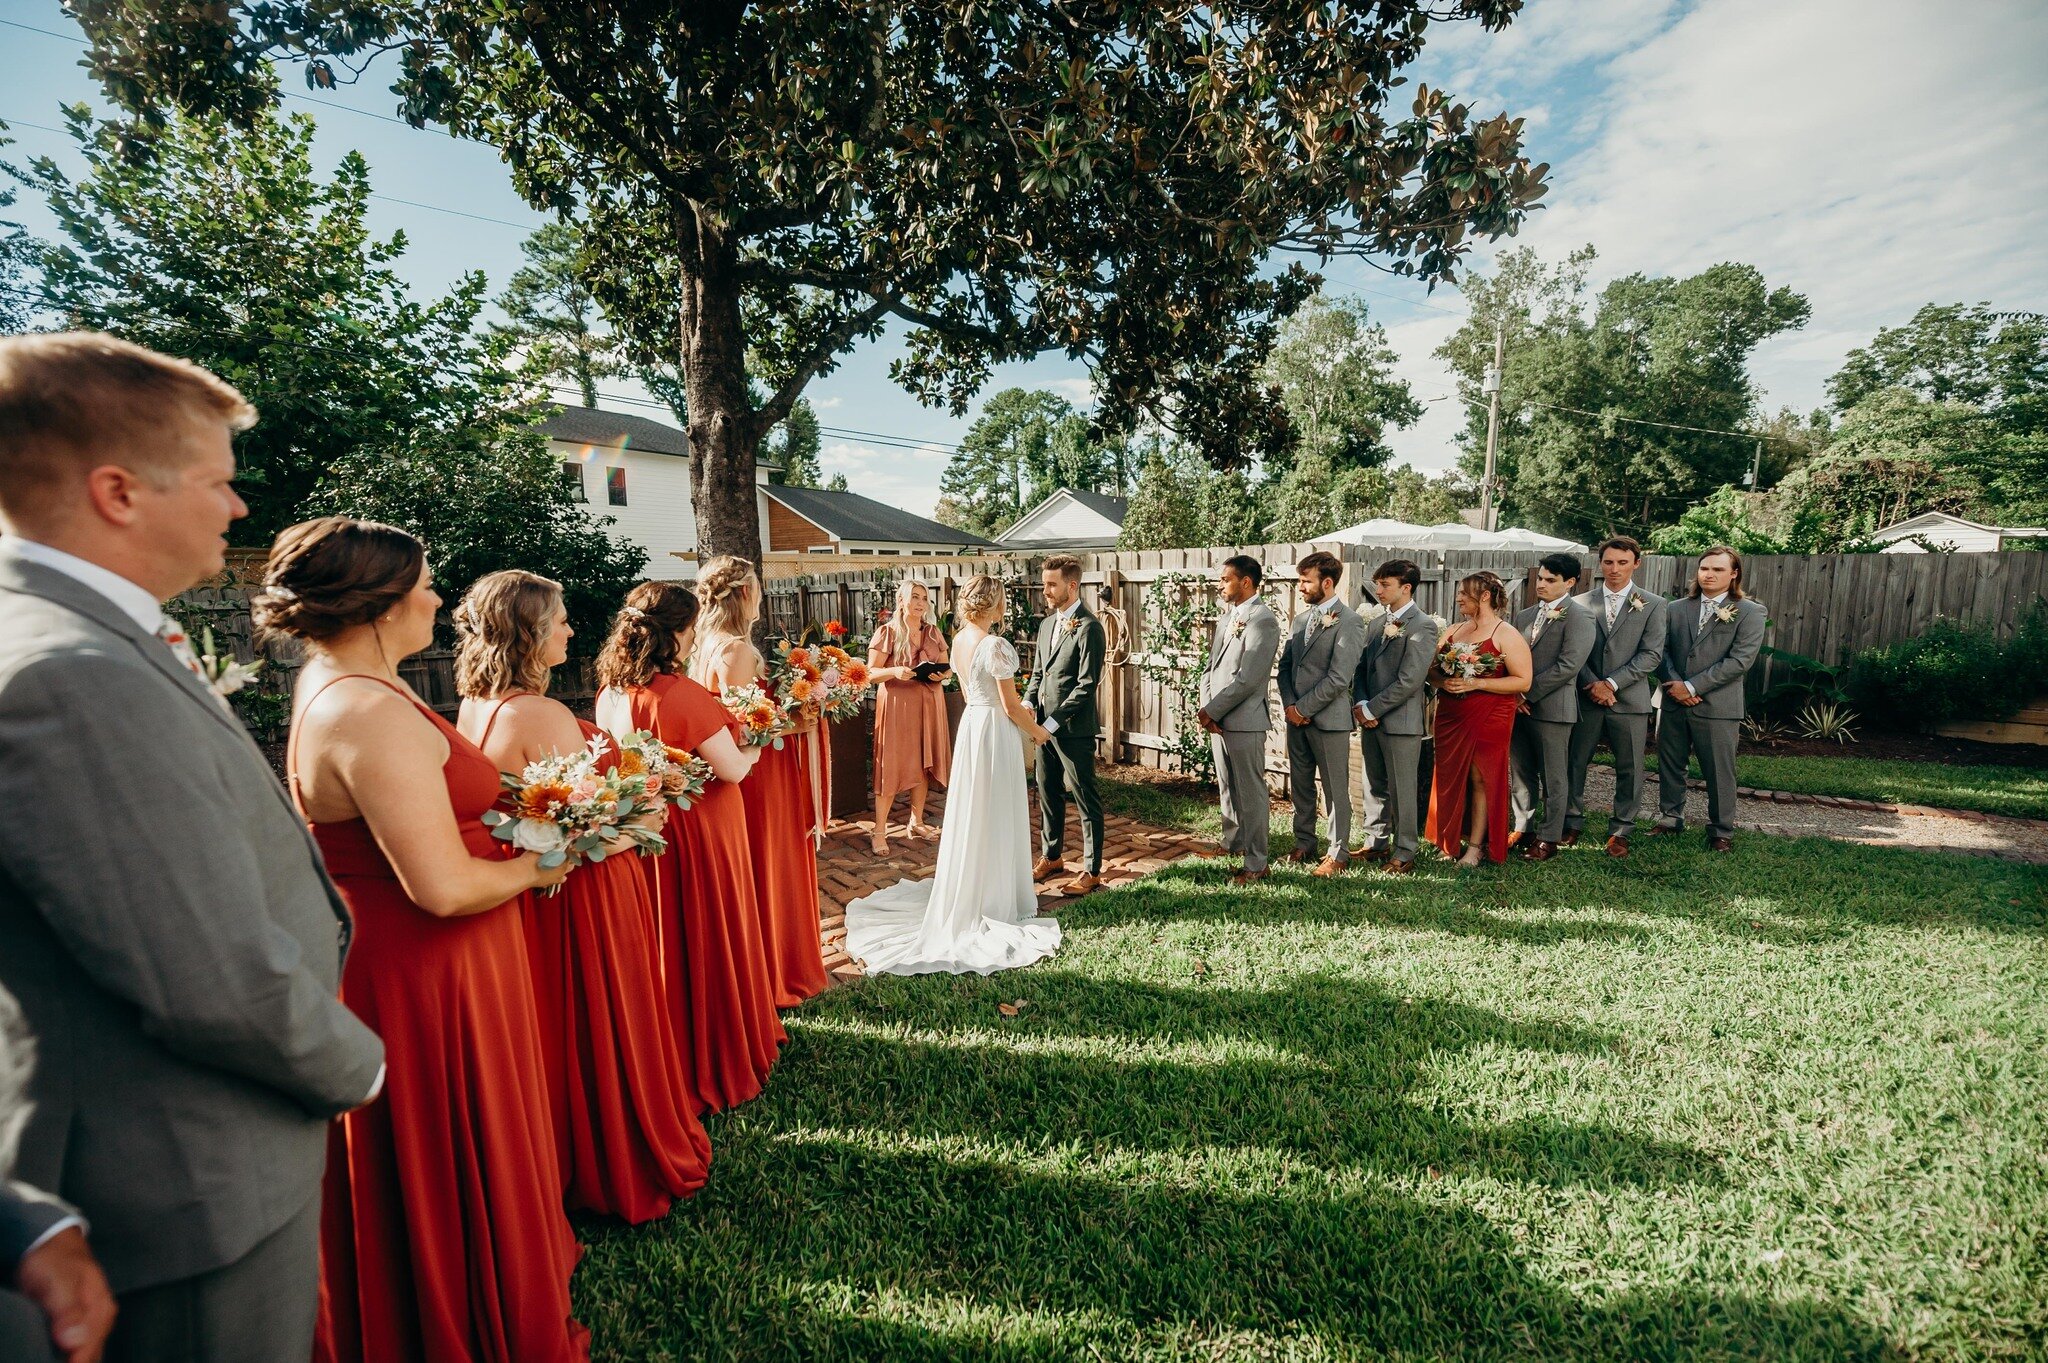 💕💕💕💕

Ceremony Venue: Parents' house
Reception Venue: @bakery_105 
DJ/Band: Brian Hood 
Photographer: Long Yau
Florist: @designsbydillonnc 
Catering: @128south 
Baker: @onebellebakery 
Rentals: @party_suppliers
Photo booth: Booth by Mail
Lighting